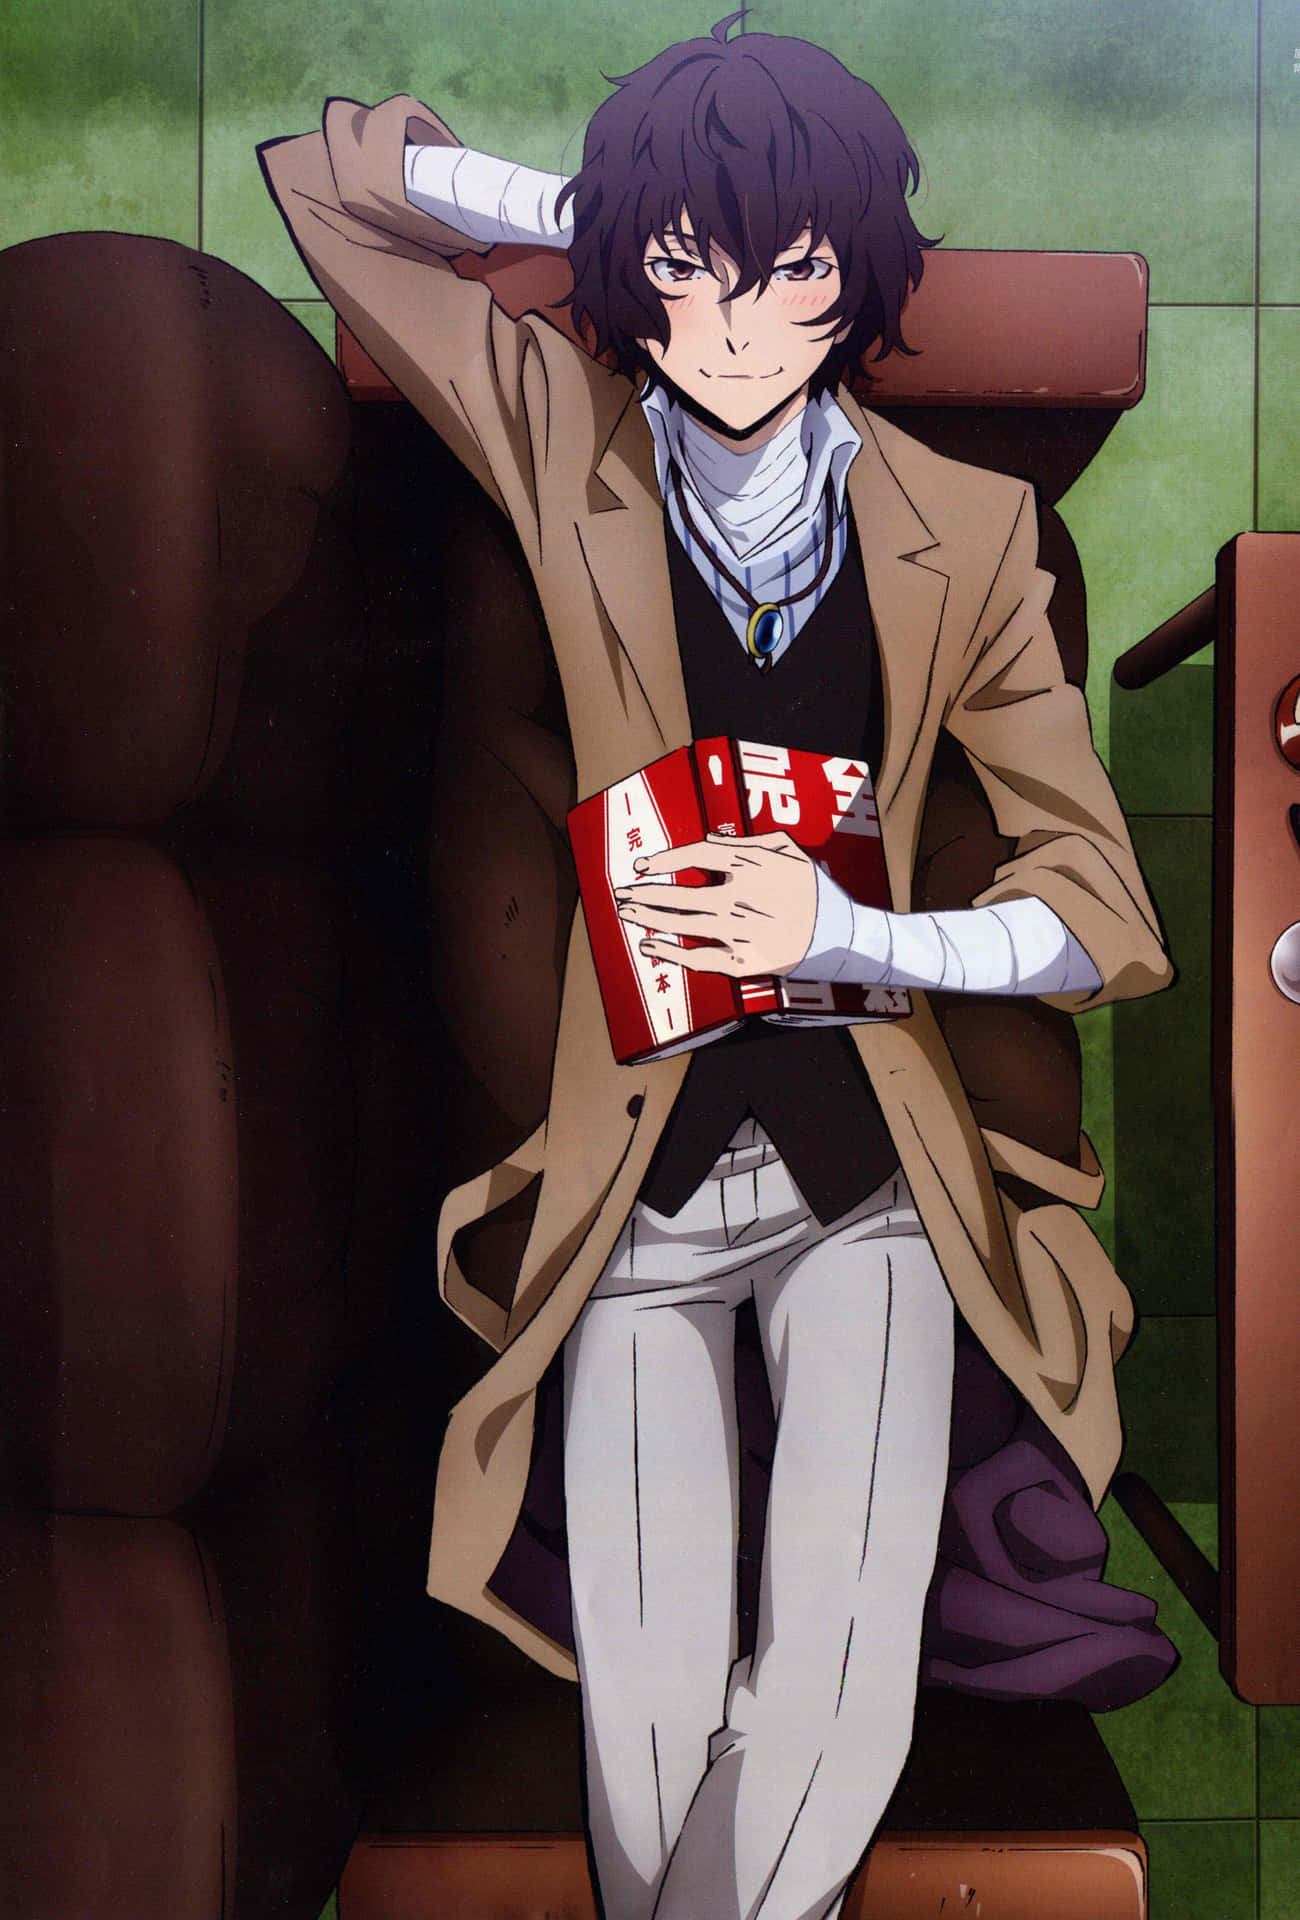 A group of detectives come together in Bungo Stray Dogs